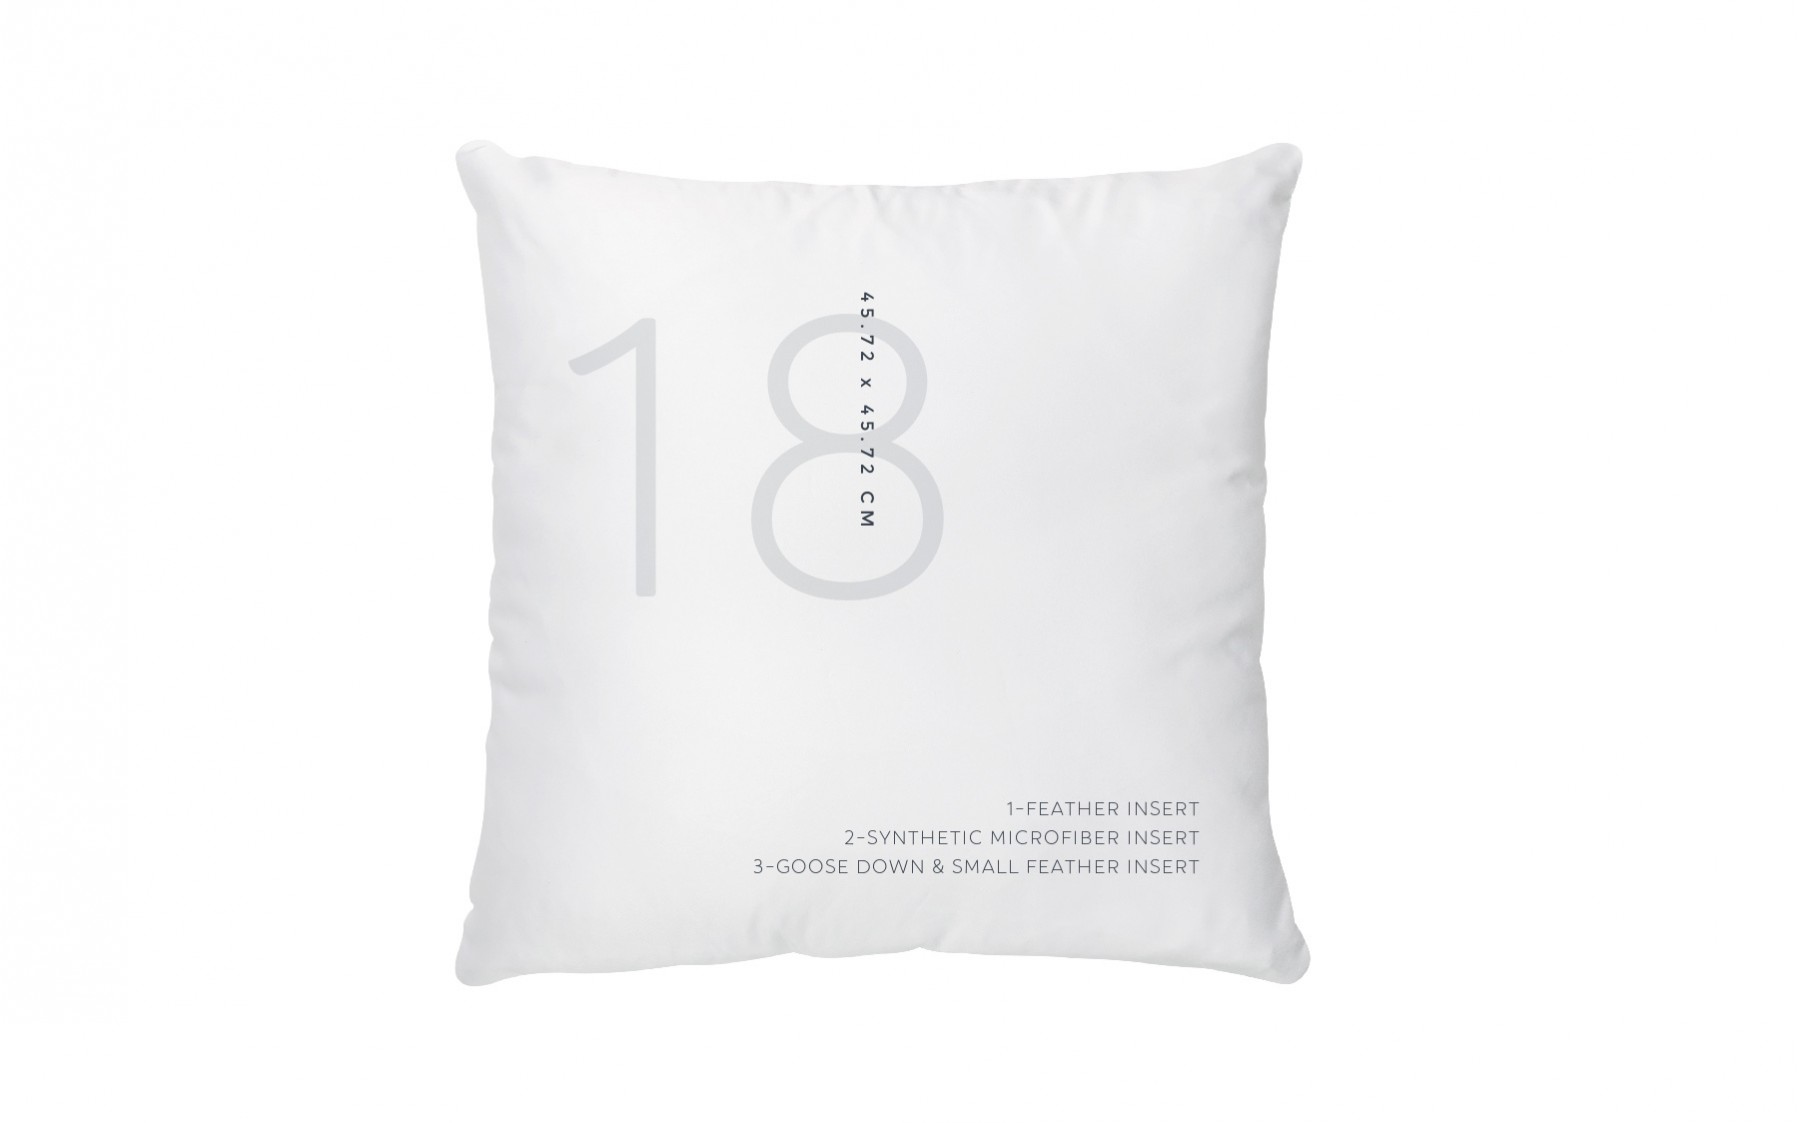 https://essliving.com/boutique/image/cache/catalog/BOURRE/shop-for-18-inches-feather-insert-pillow-high-end-decorative-cushions-synthetic-pillow-insert-goose-down-pillow-insert-made-in-quebec-canada-ess-living-1800x1123.jpg